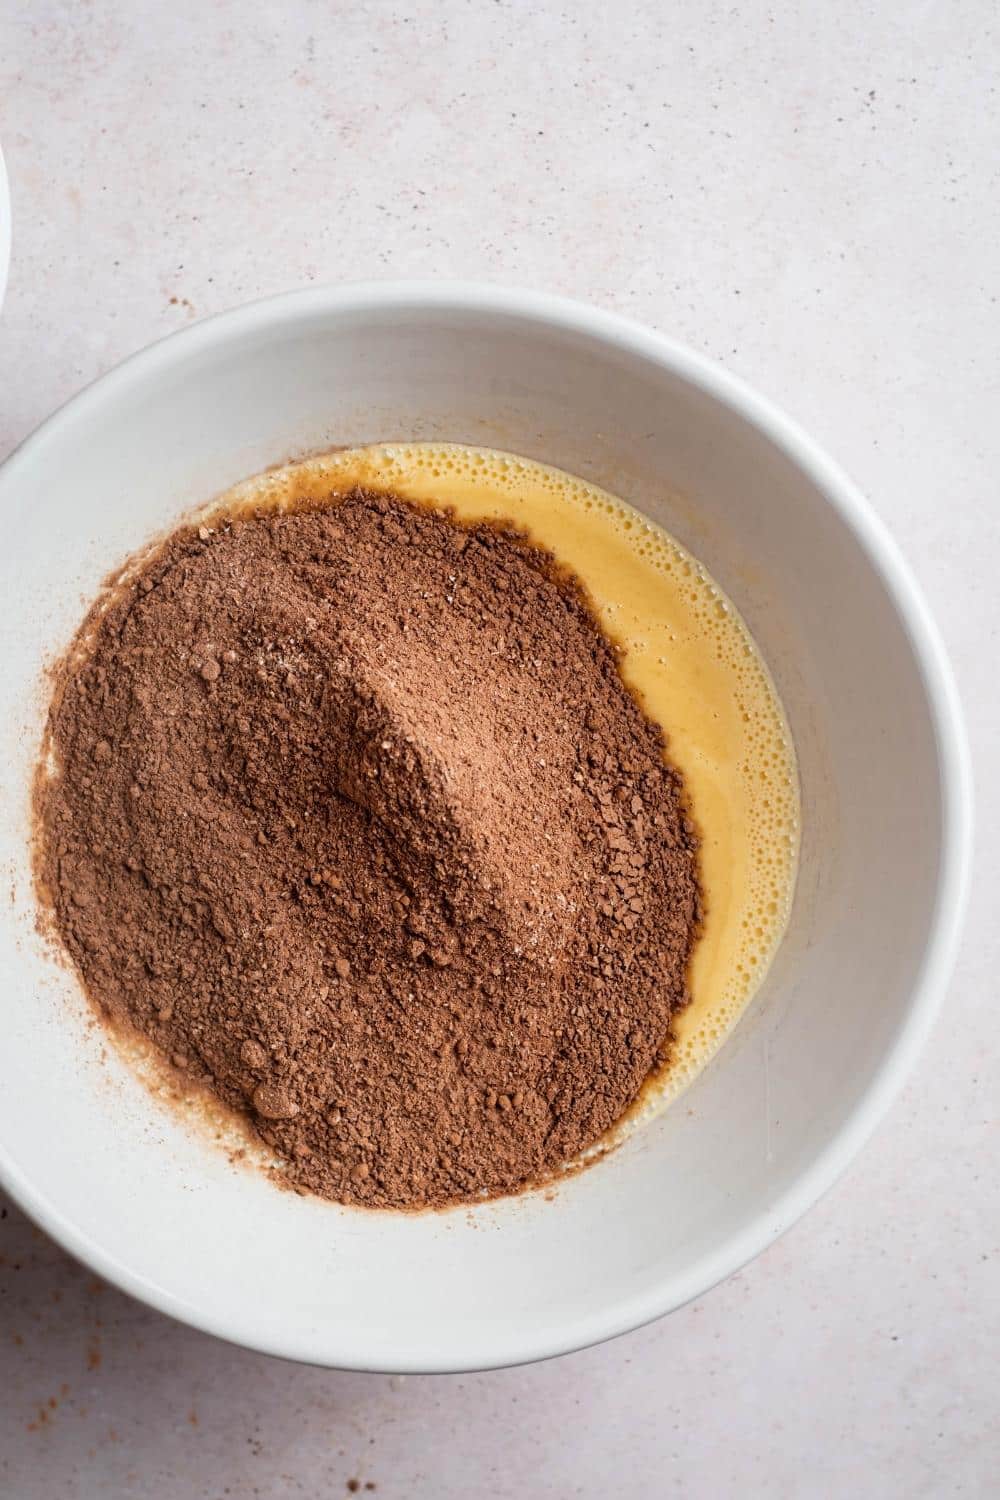 Chocolate protein powder in a white bowl with an egg mixture in it.